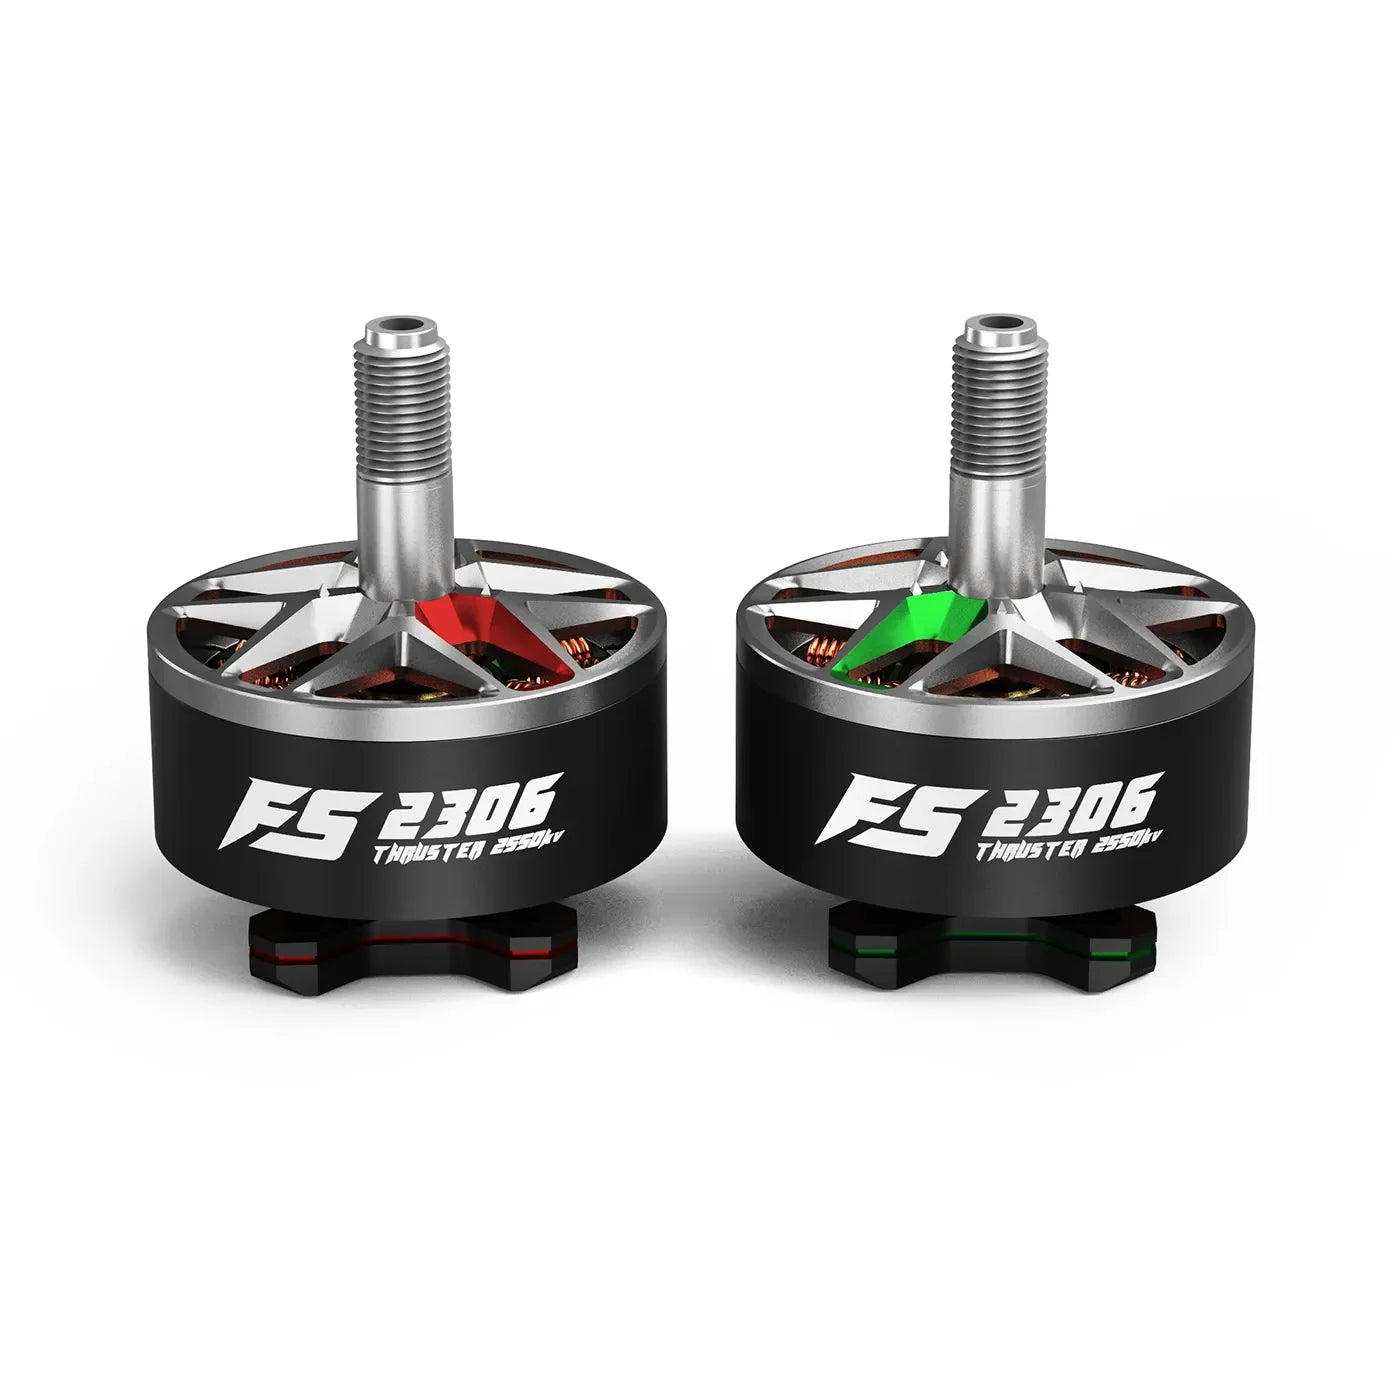 MAD Thruster FS2306 Brushless Motor, Brushless motor for 5-6 inch freestyle FPV drones with high thrust and efficient performance.